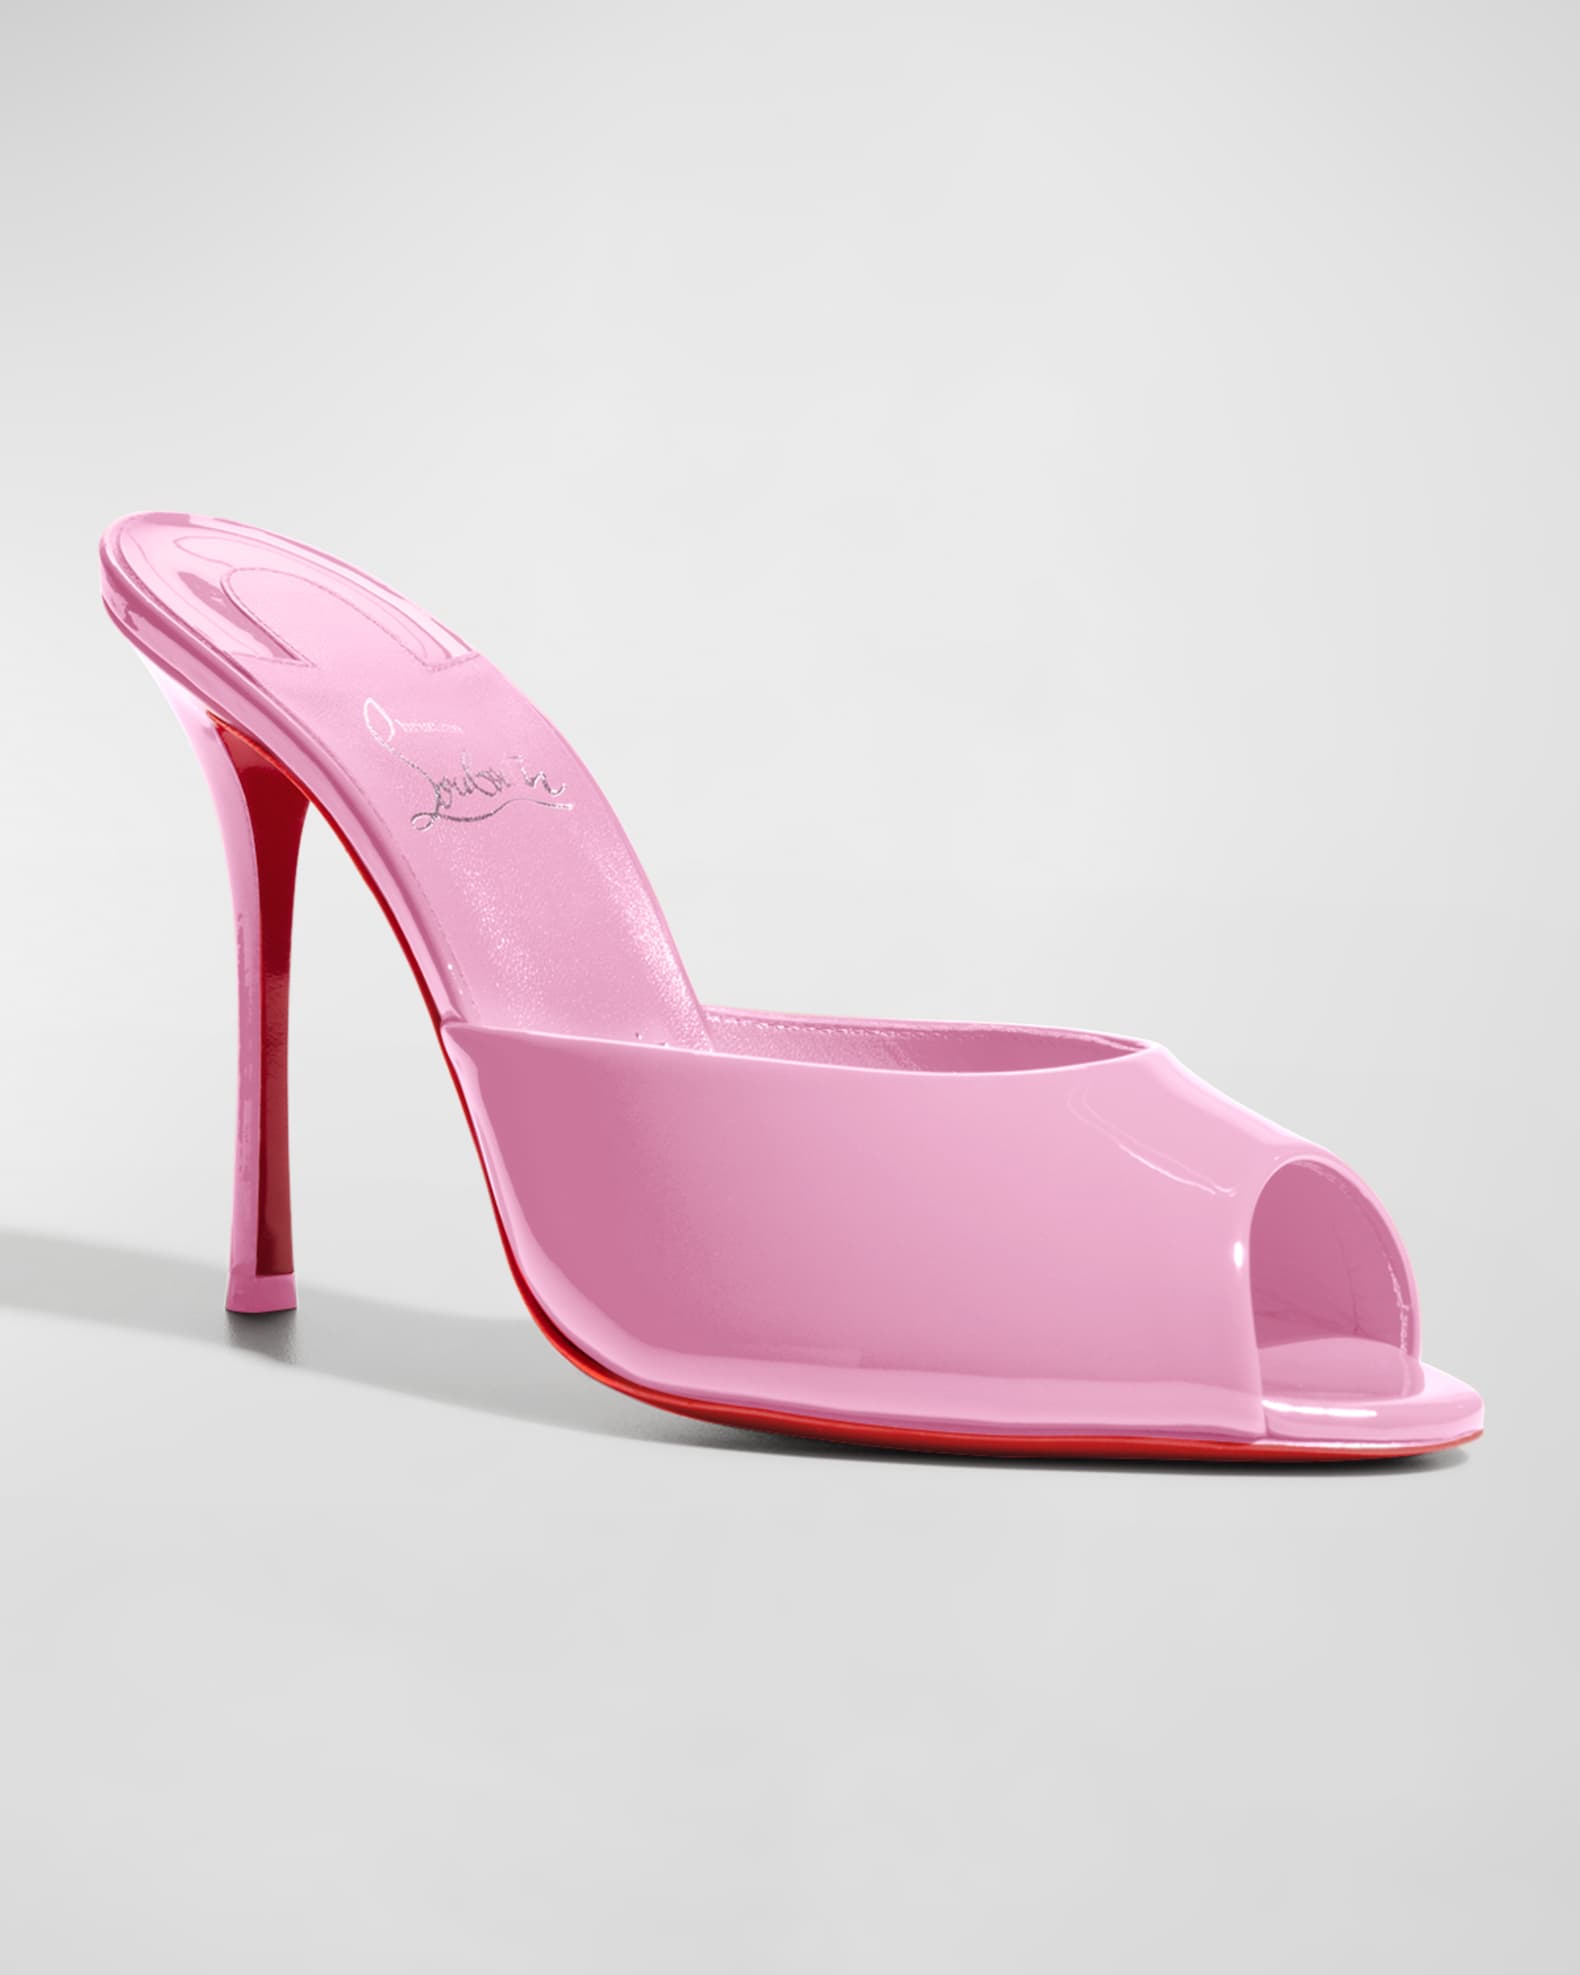 Christian Louboutin Me Dolly Patent Red Sole Sandals | Neiman Marcus